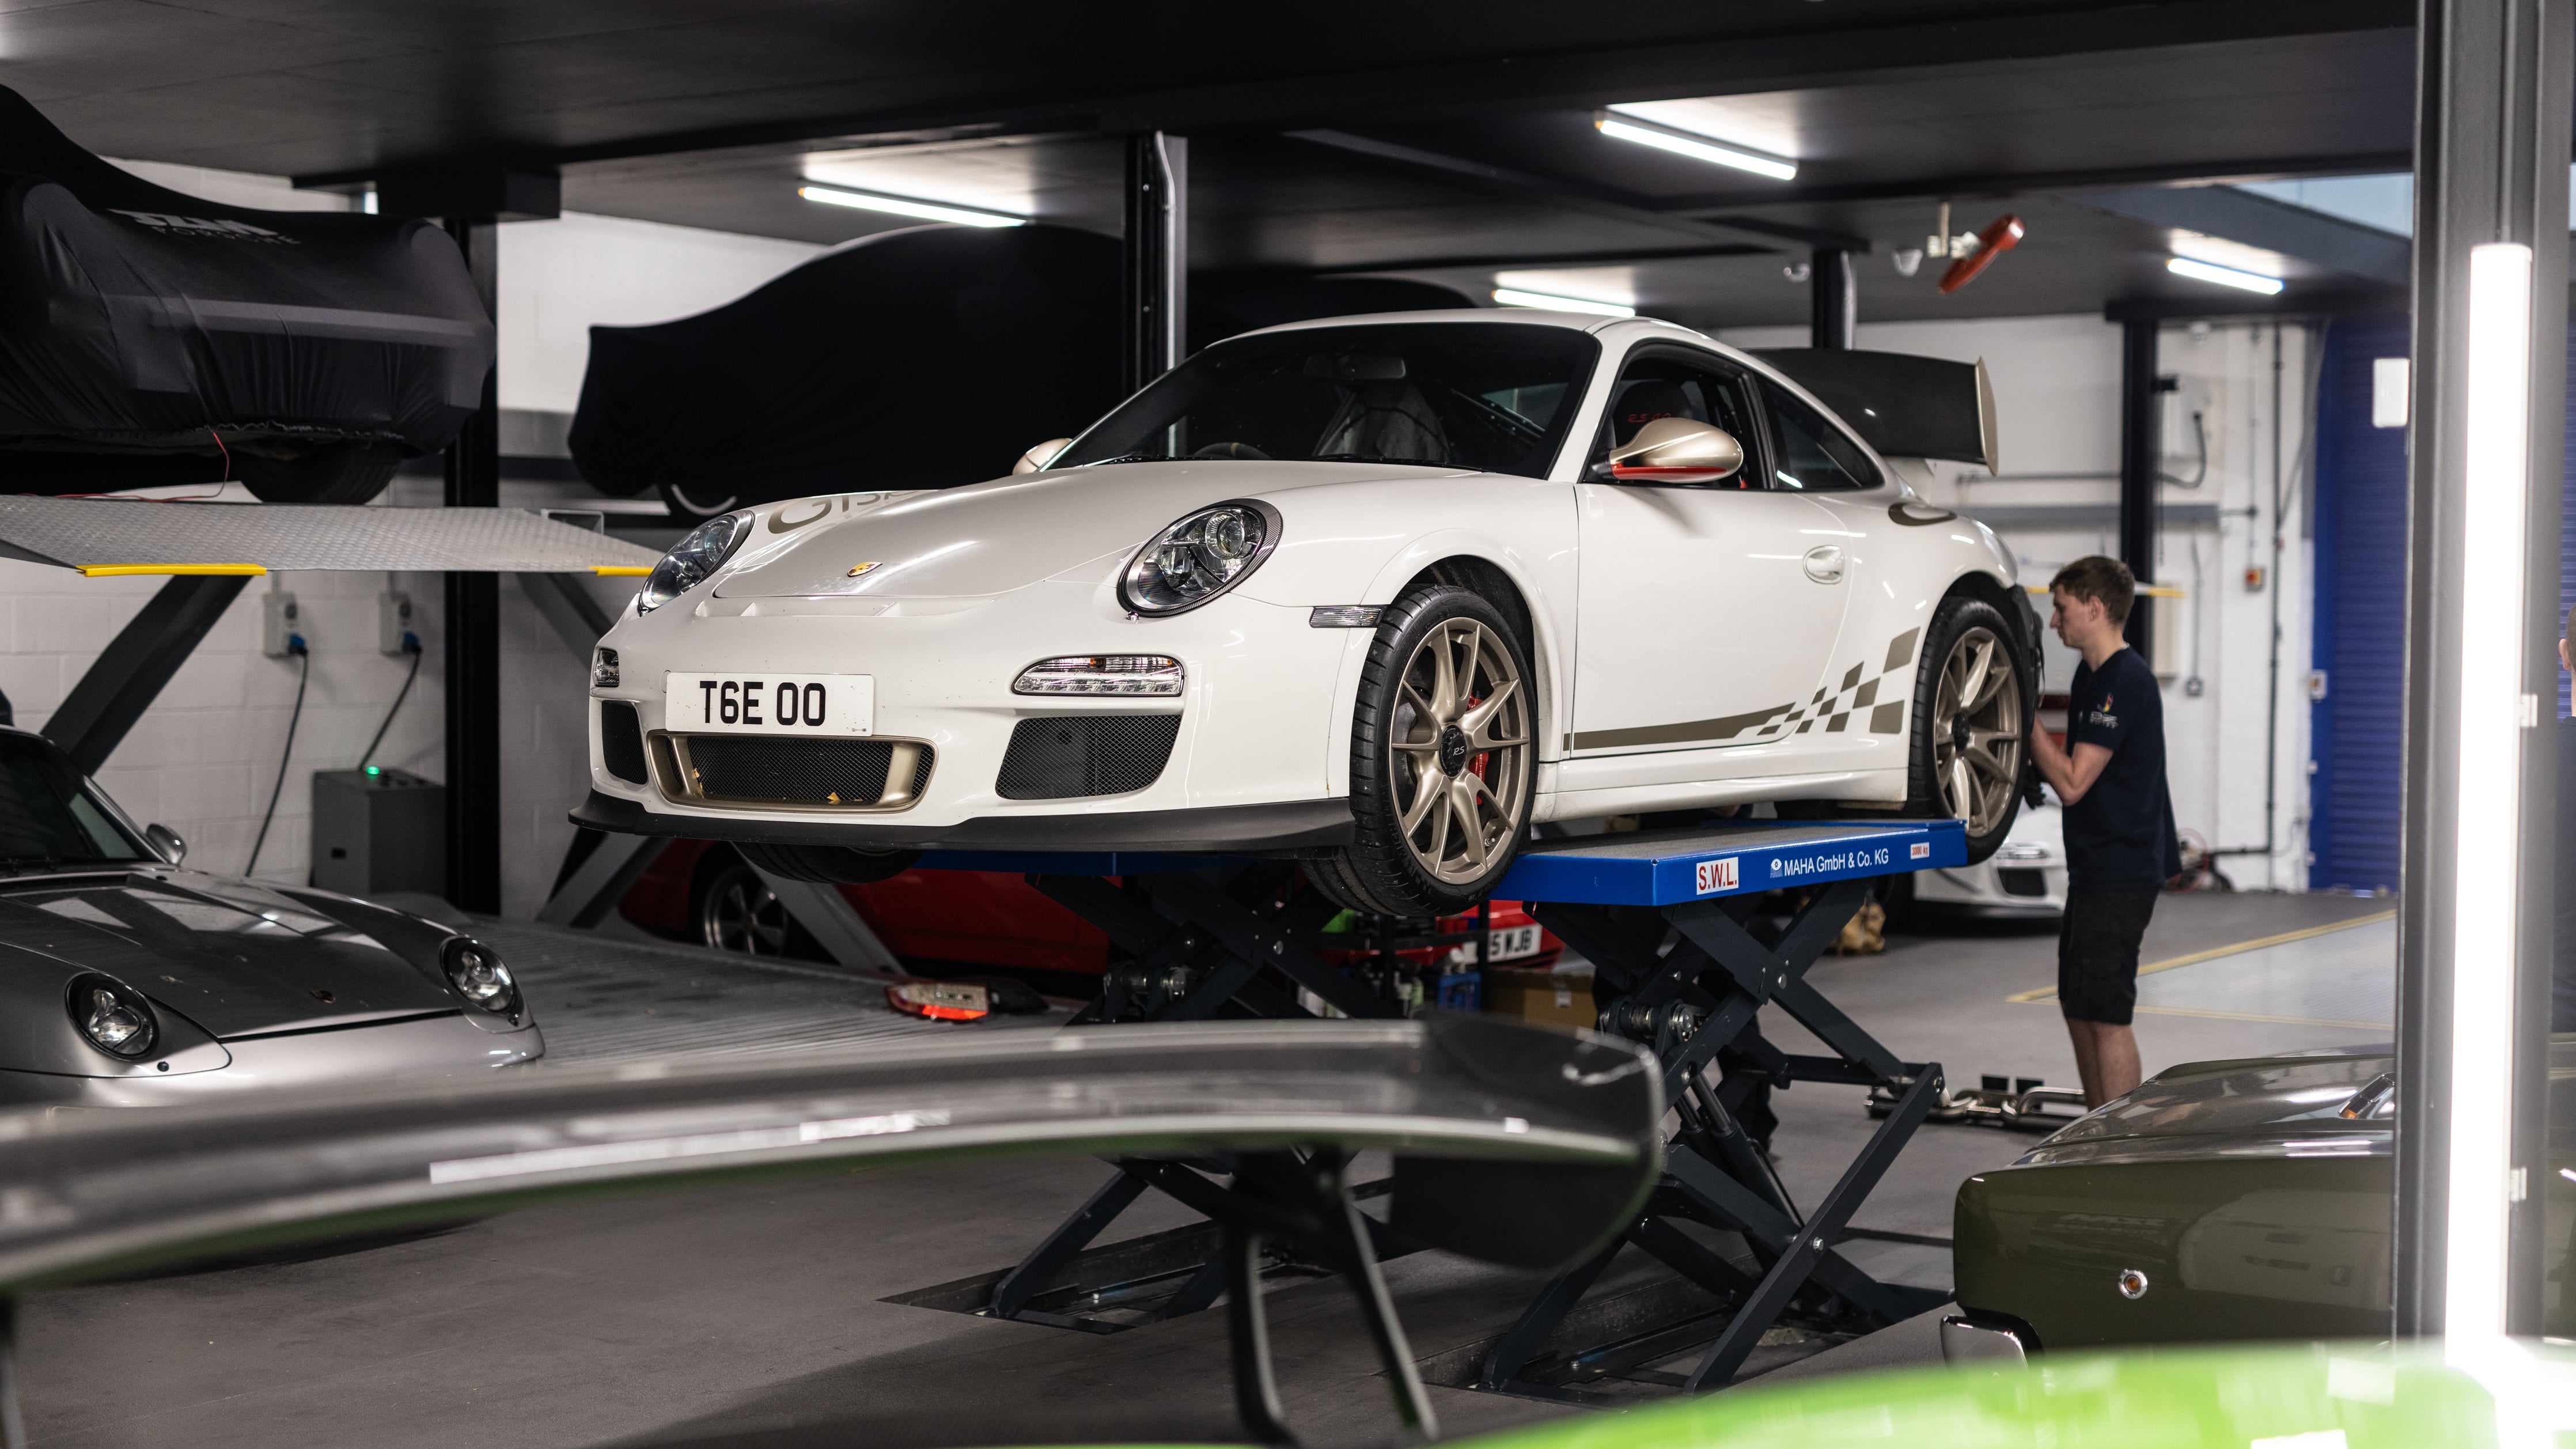 TGE UPGRADES HIS 997.2 GT3 RS WITH JCR!